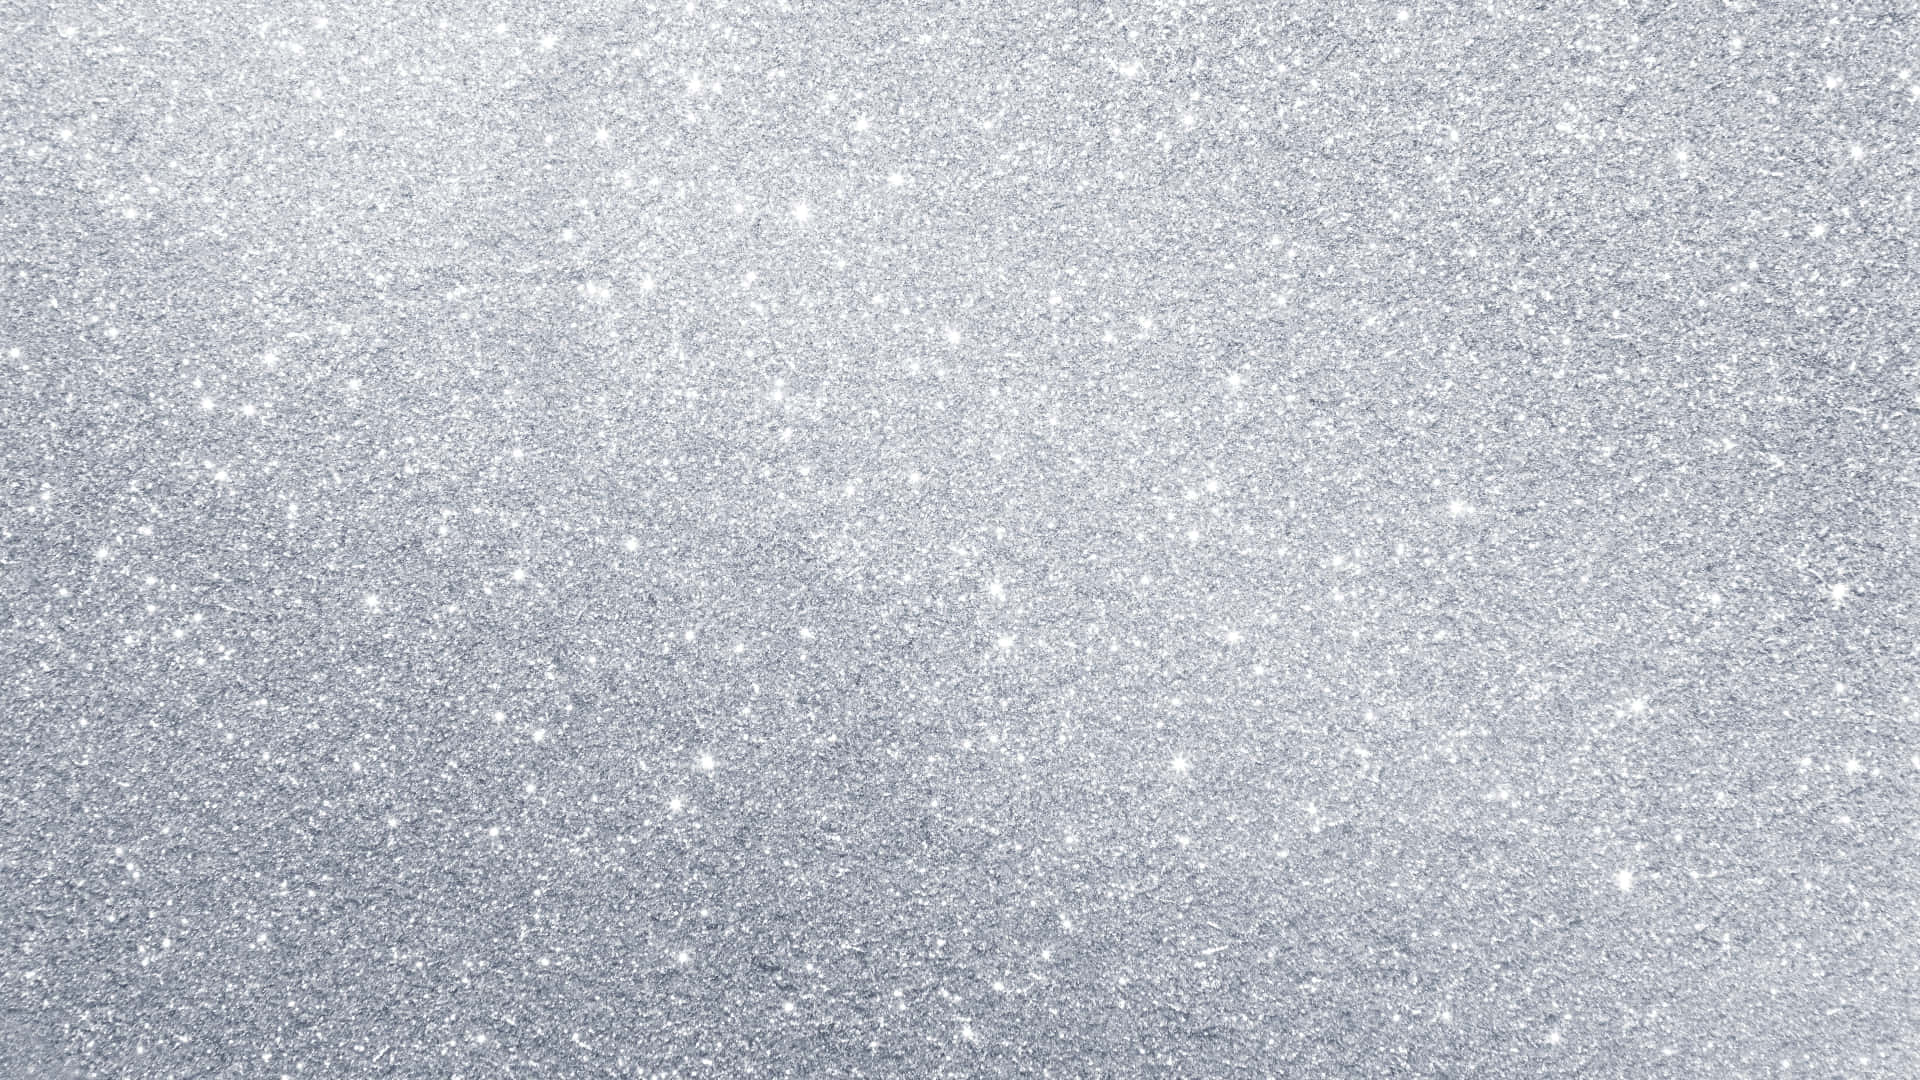 Add some sparkle to your life with White Glitter Wallpaper